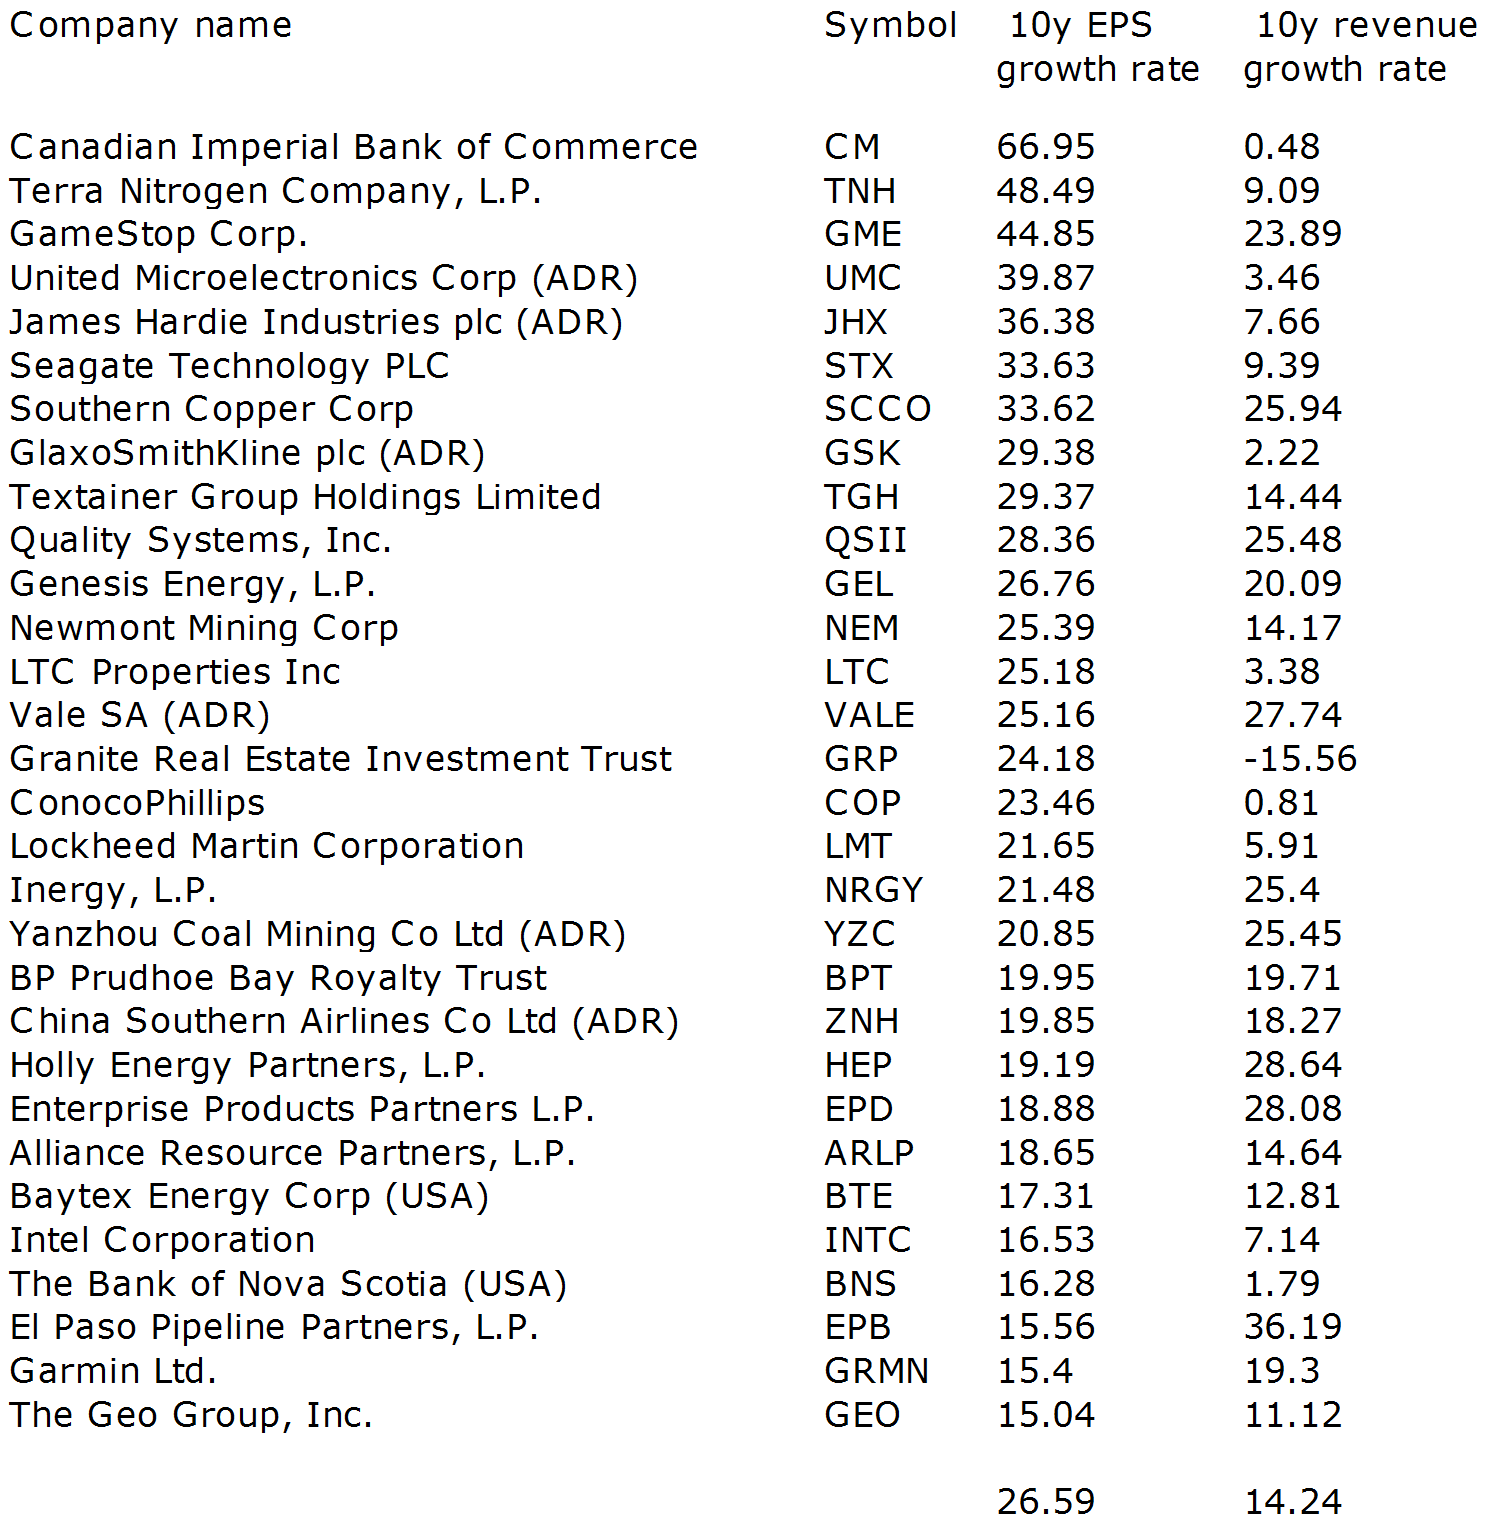 30 Top Yielding Stocks With Highest Earnings Per Share Growth